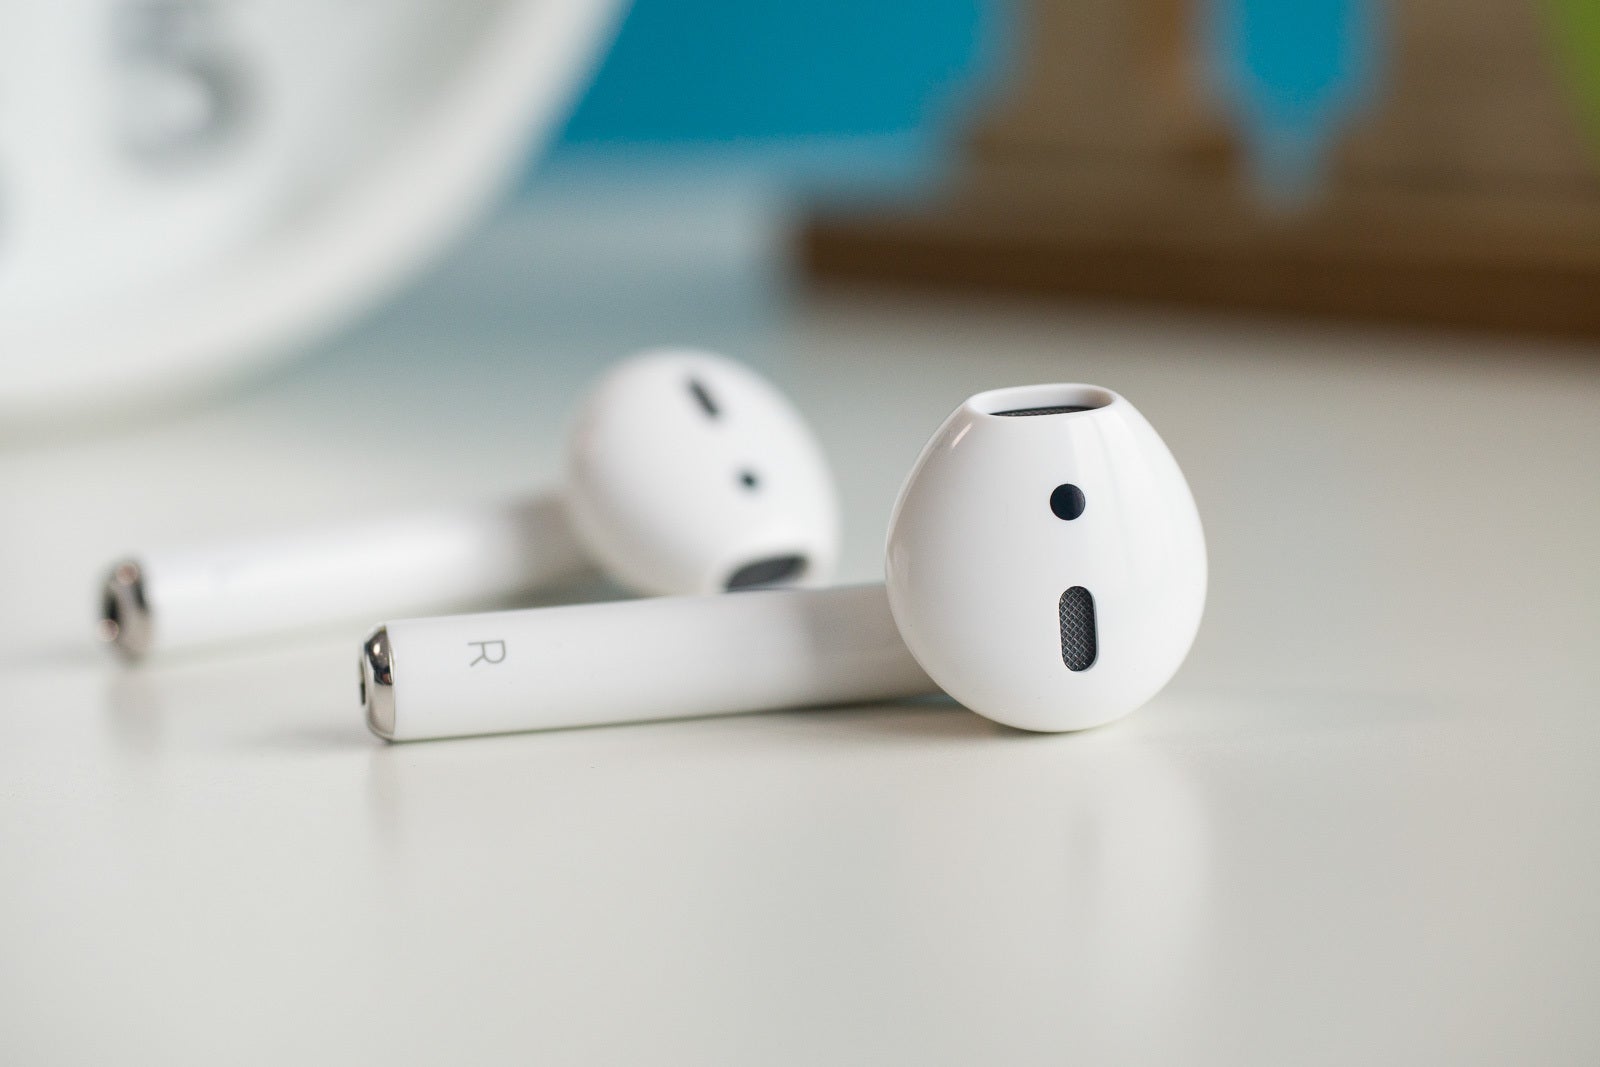 The 2019 AirPods - Apple may launch cheaper AirPods, game controller, two HomePods, and more soon